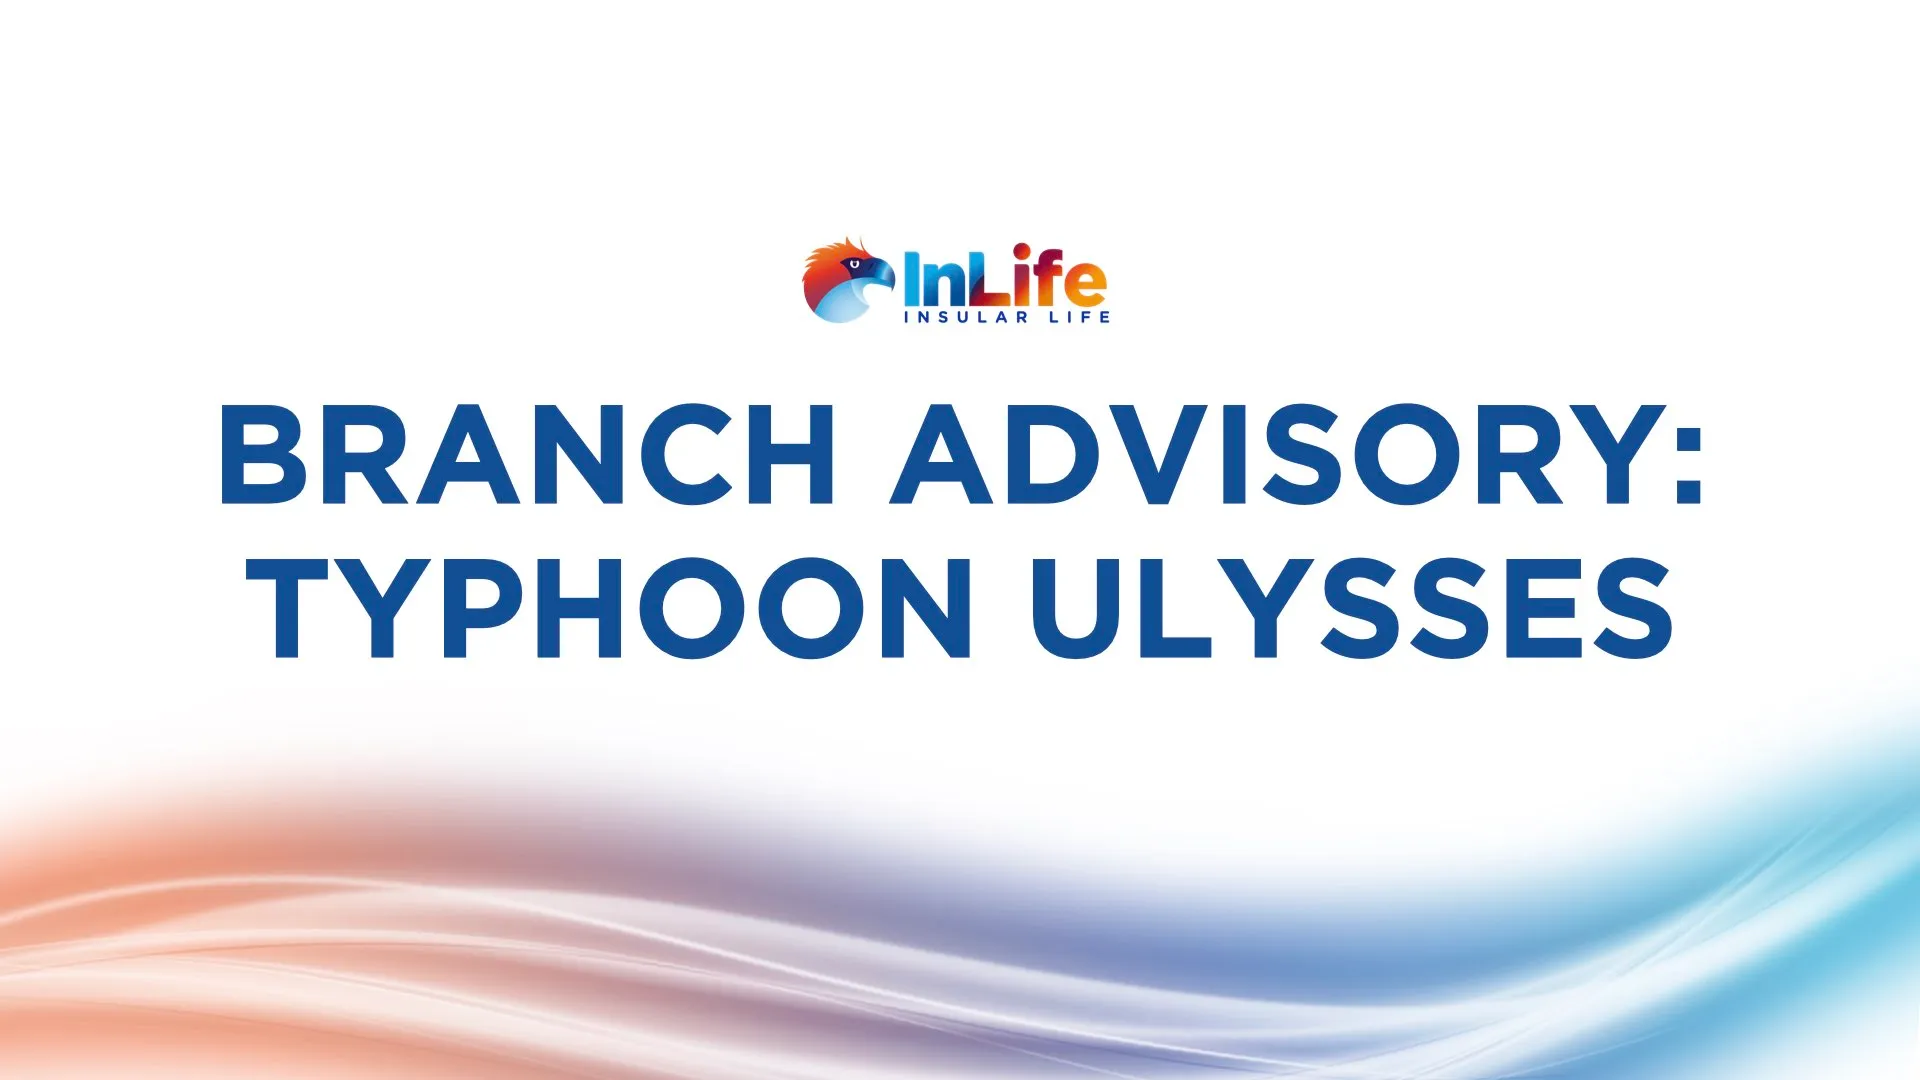 closed-inlife-branches-due-to-typhoon-ulysses